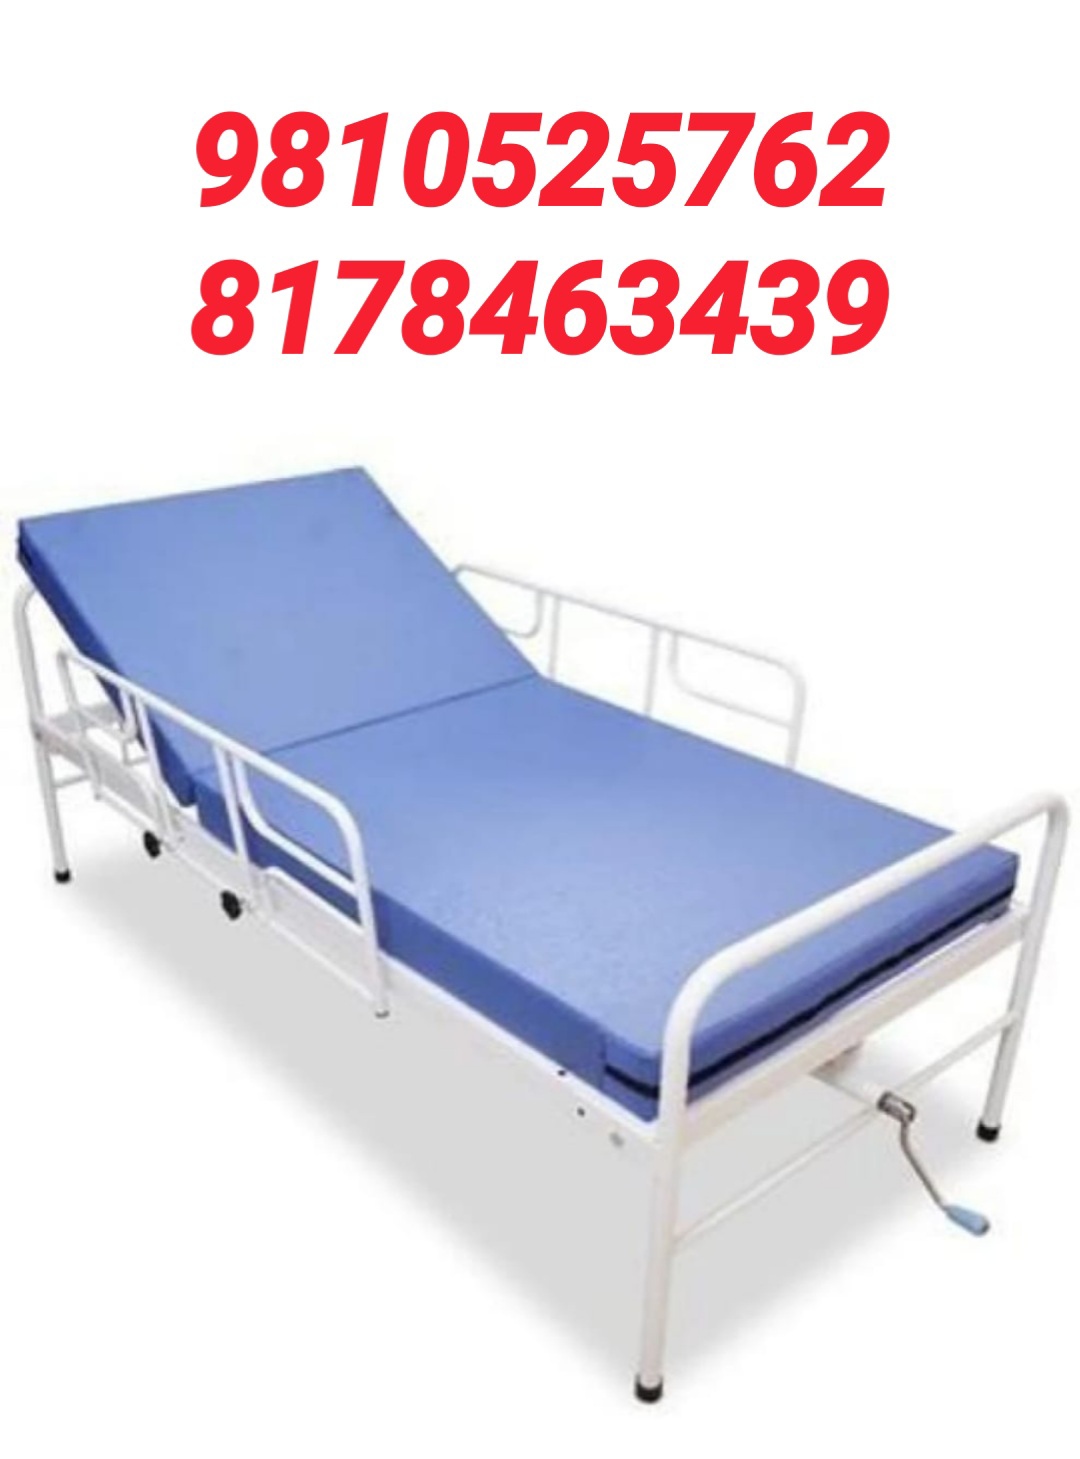 SEMI FOWLER HOSPITAL BED RENT IN GREATER NOIDA 8178463439